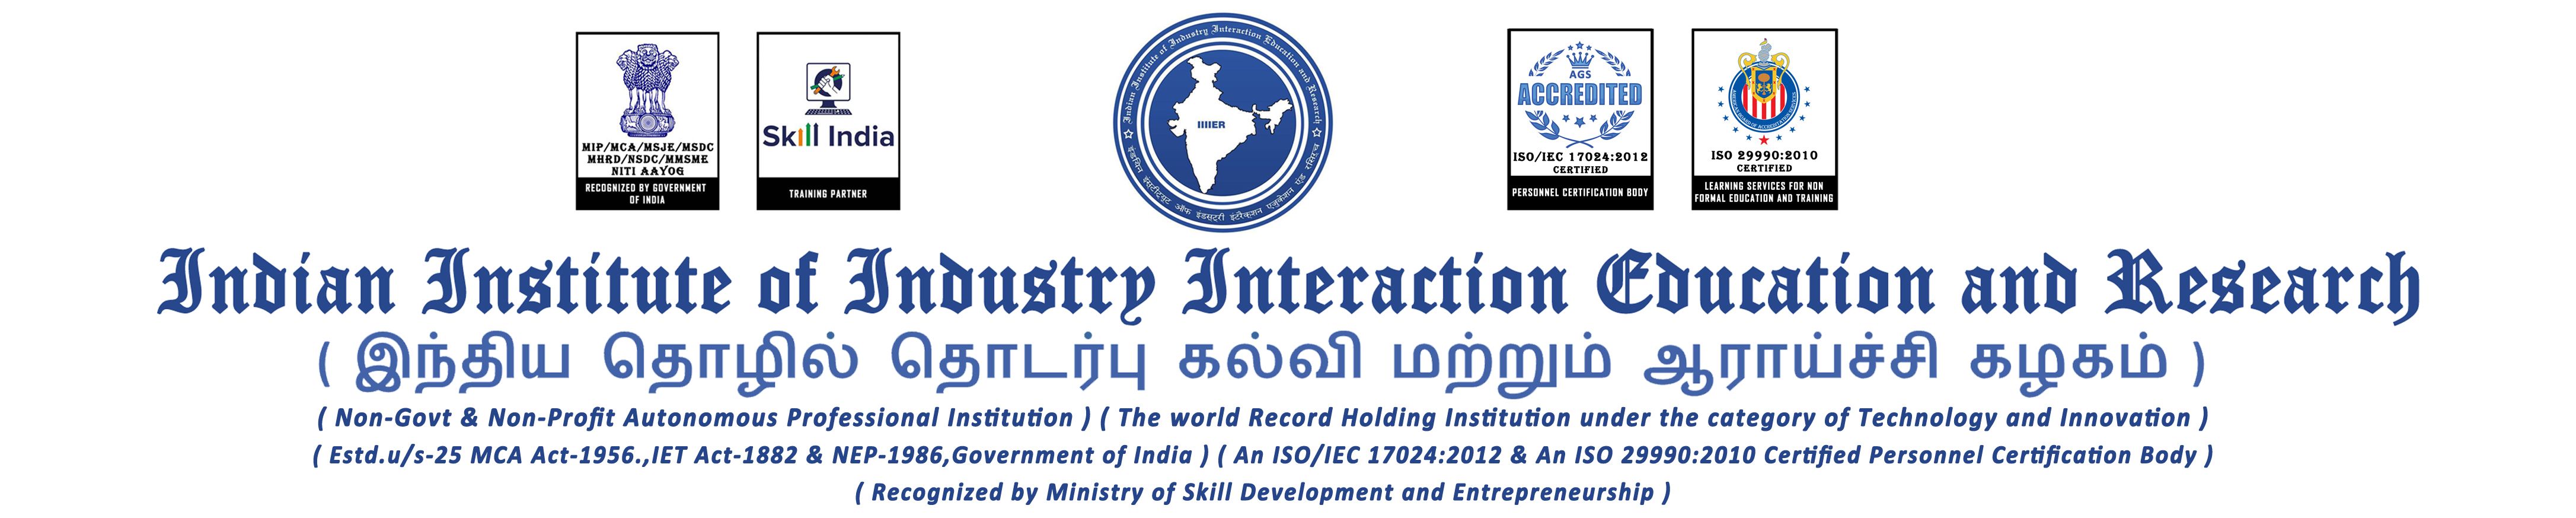 Indian Institute of Industry Interaction Education and Research